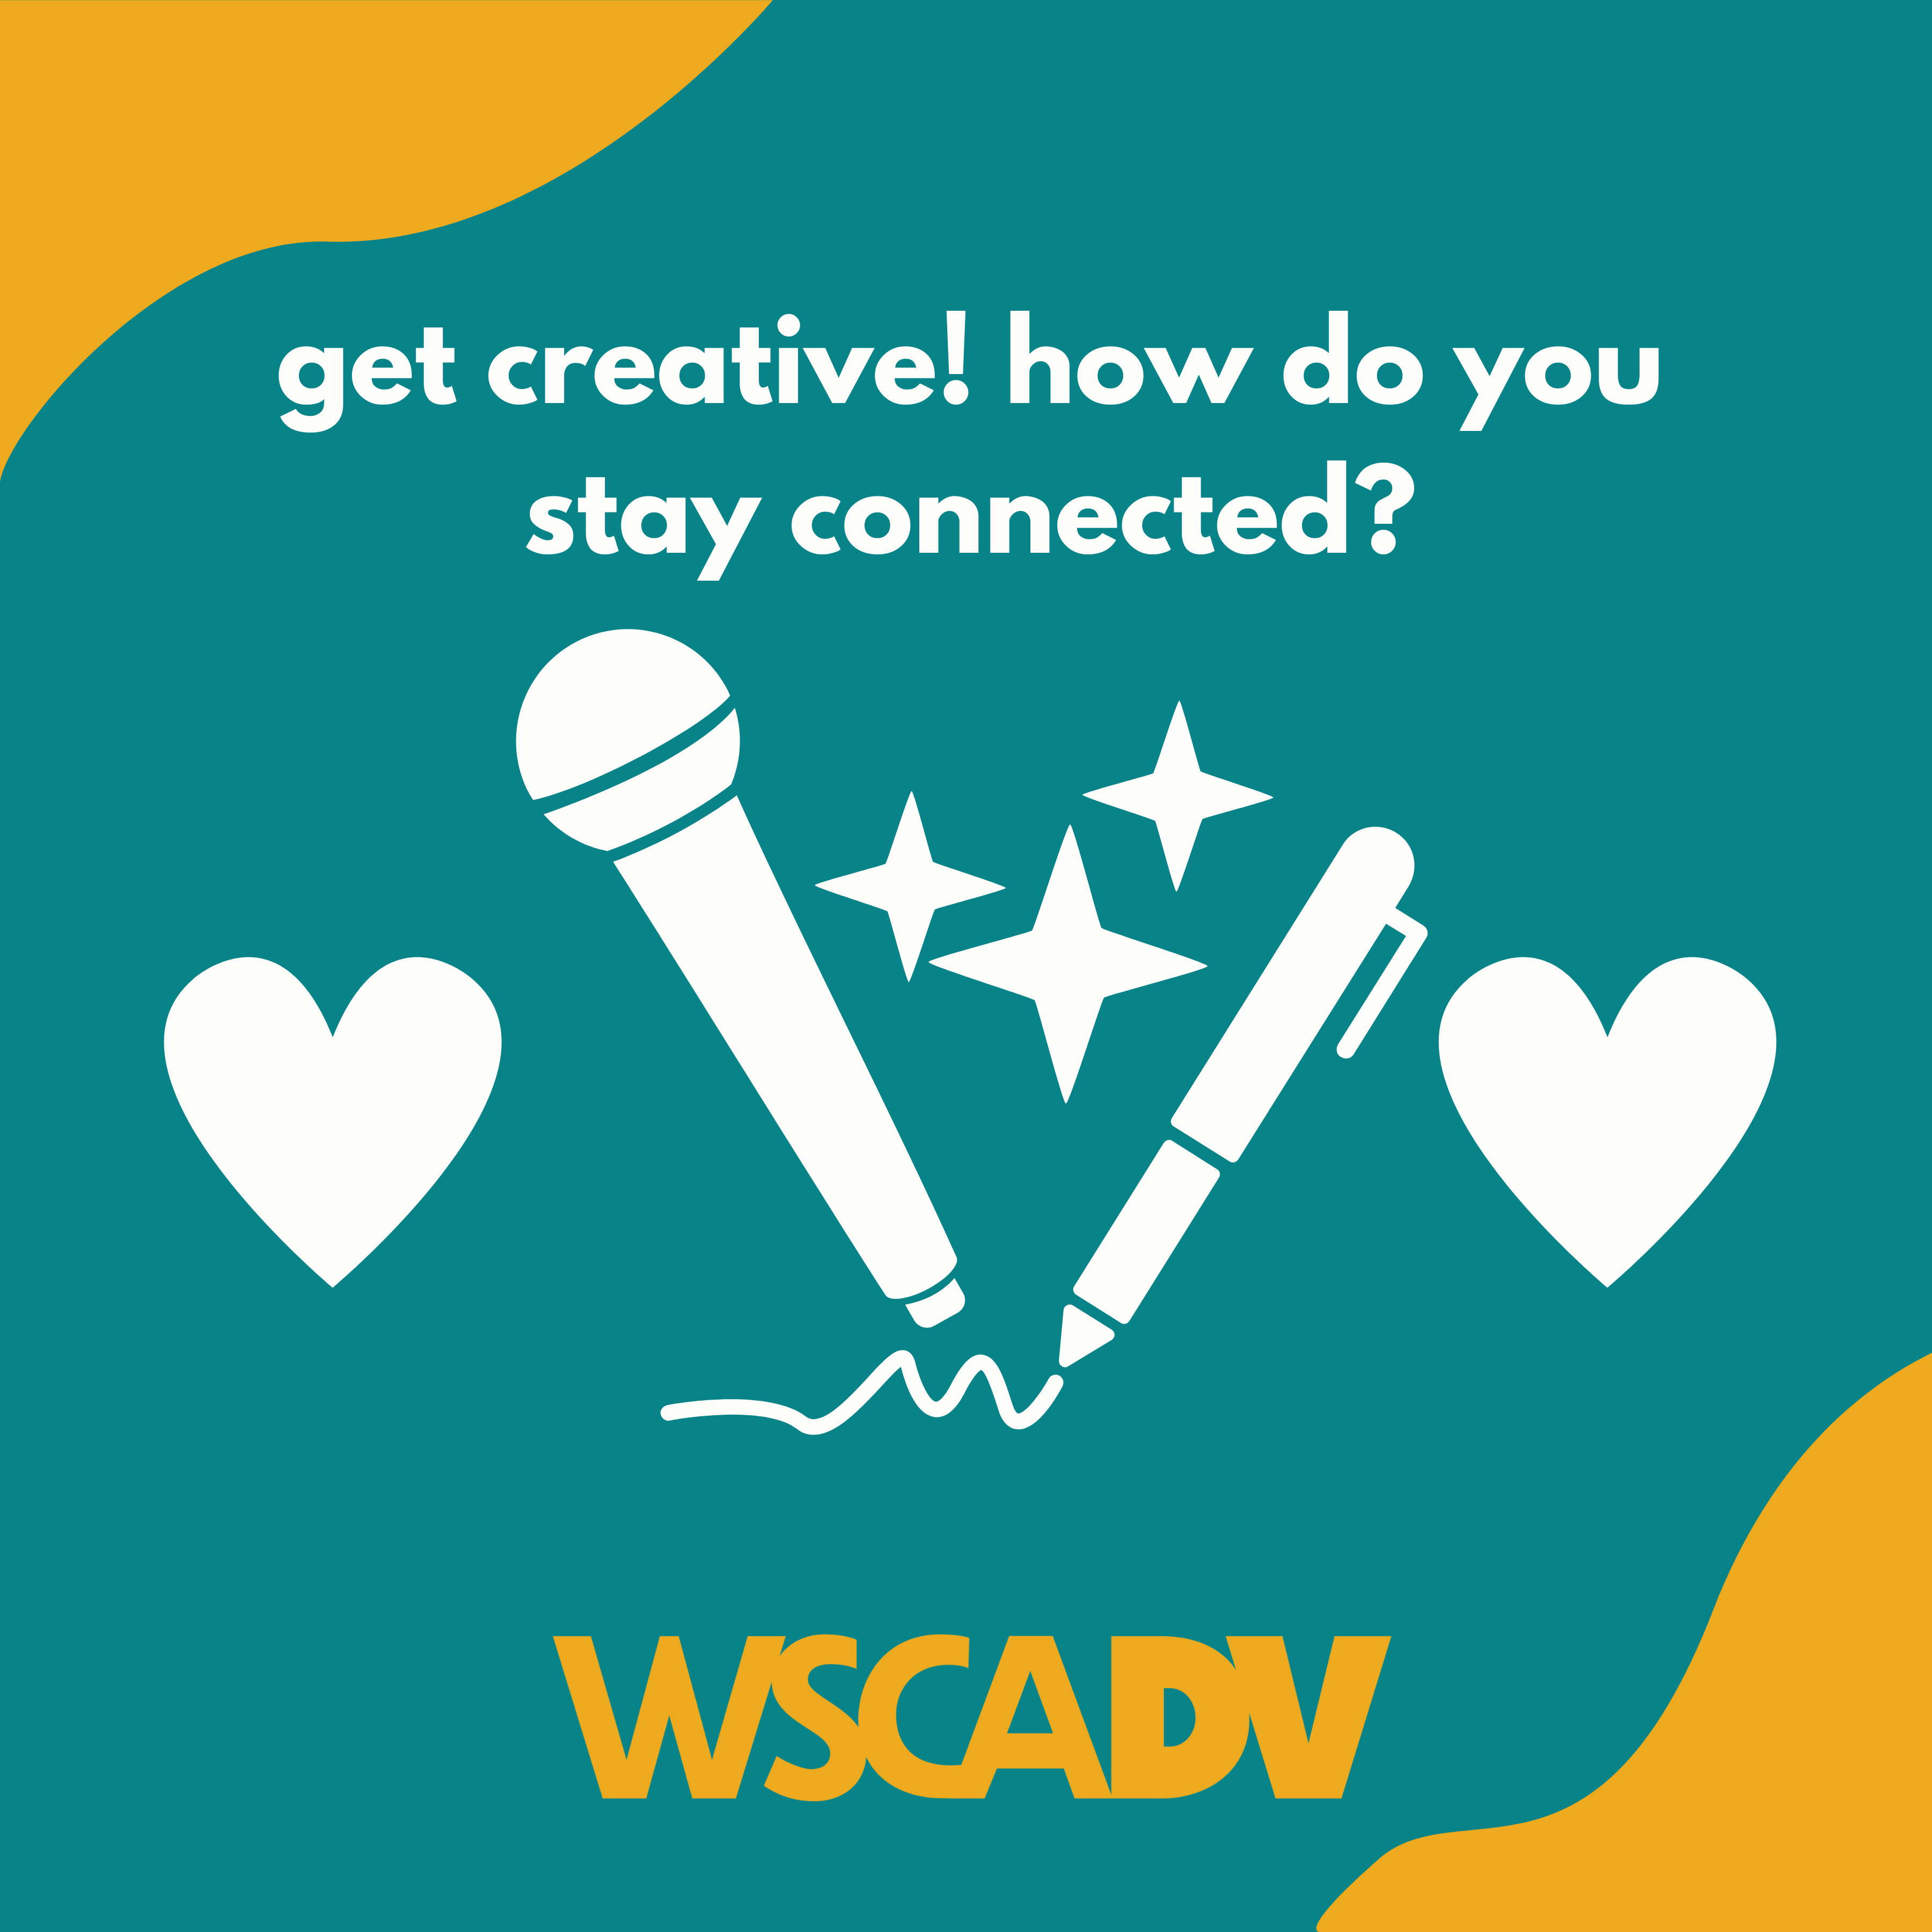 get creative! how do you stay connected?